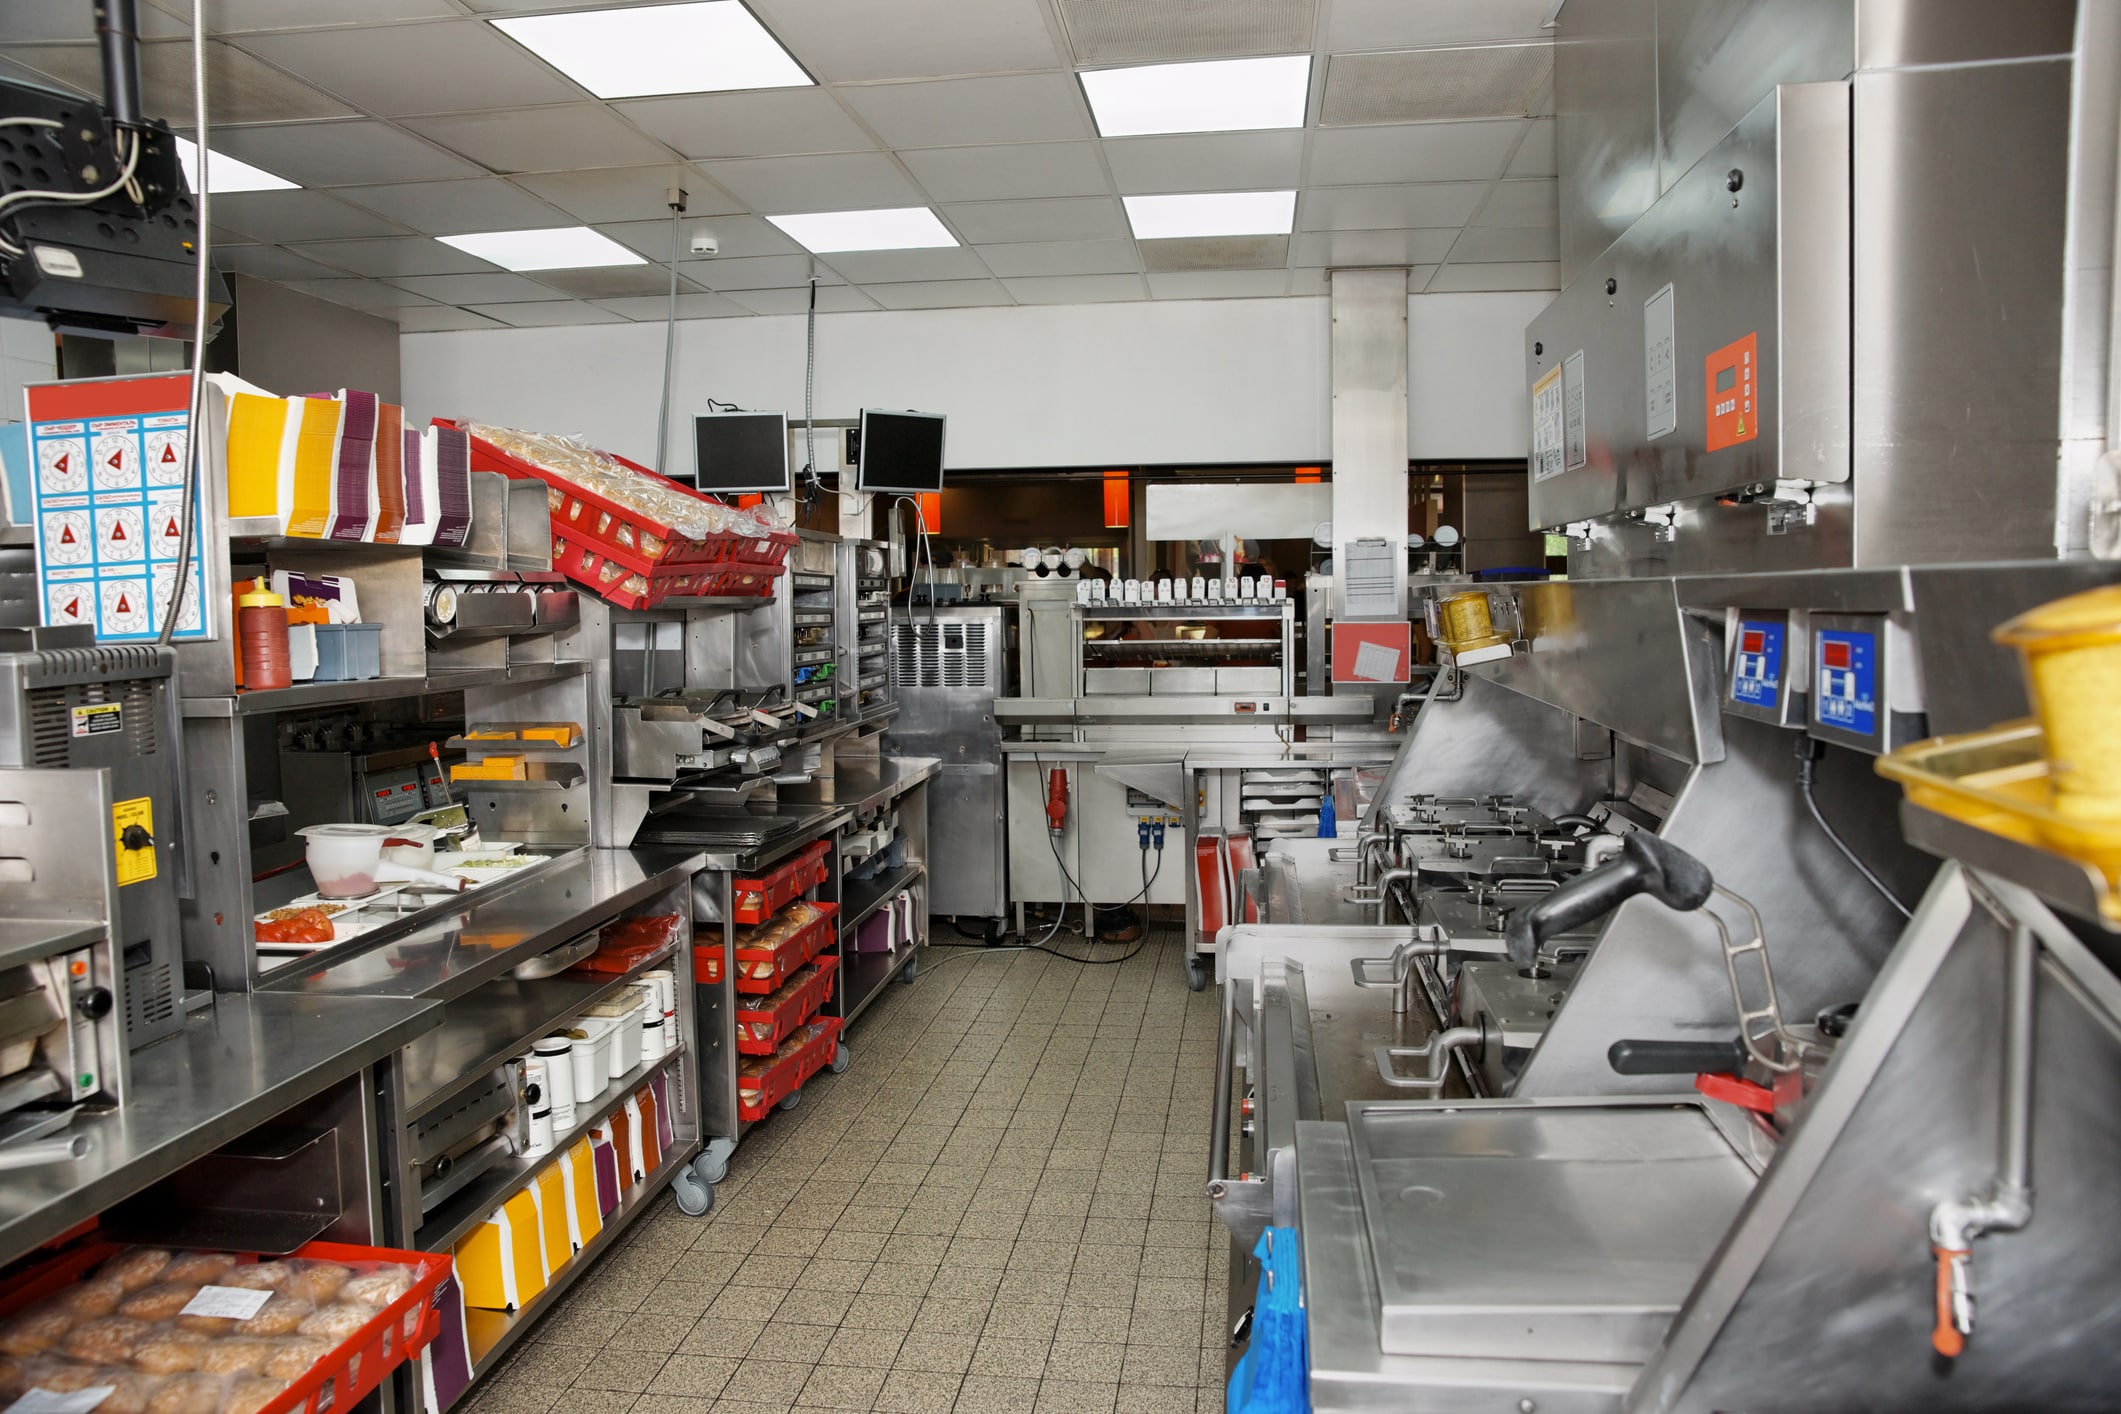 Commercial kitchen of a fast food restaurant